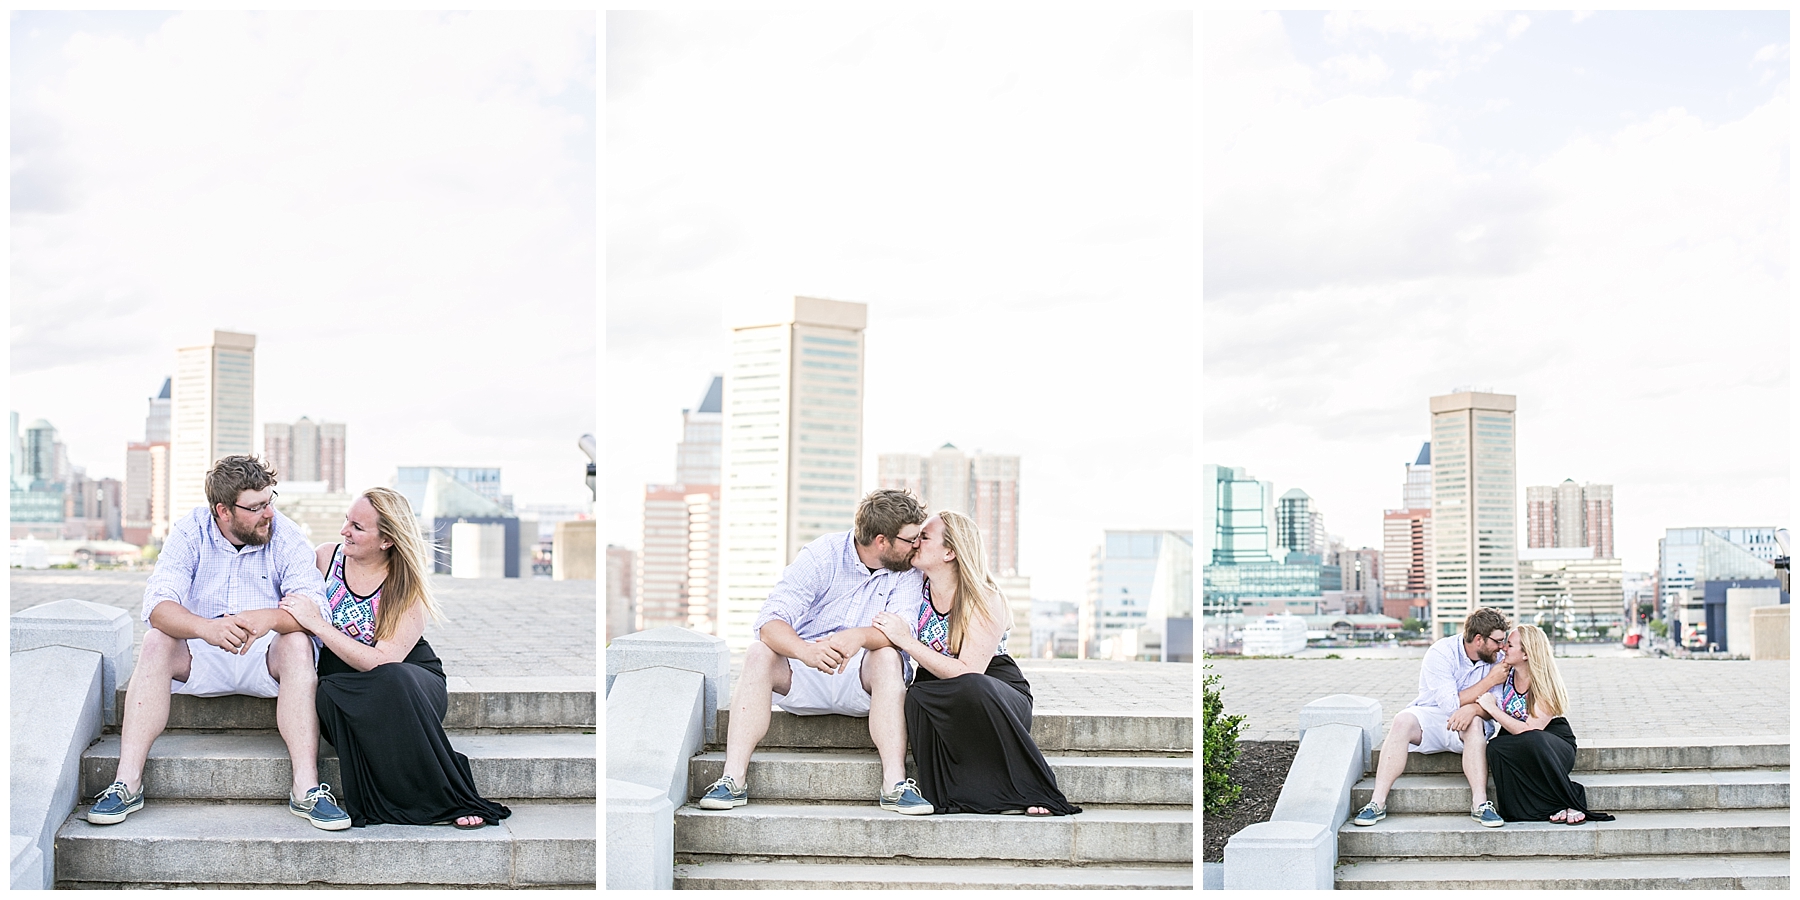 Tess Ray Camden Yards Engagement Session Living Radiant Photography photos_0045.jpg